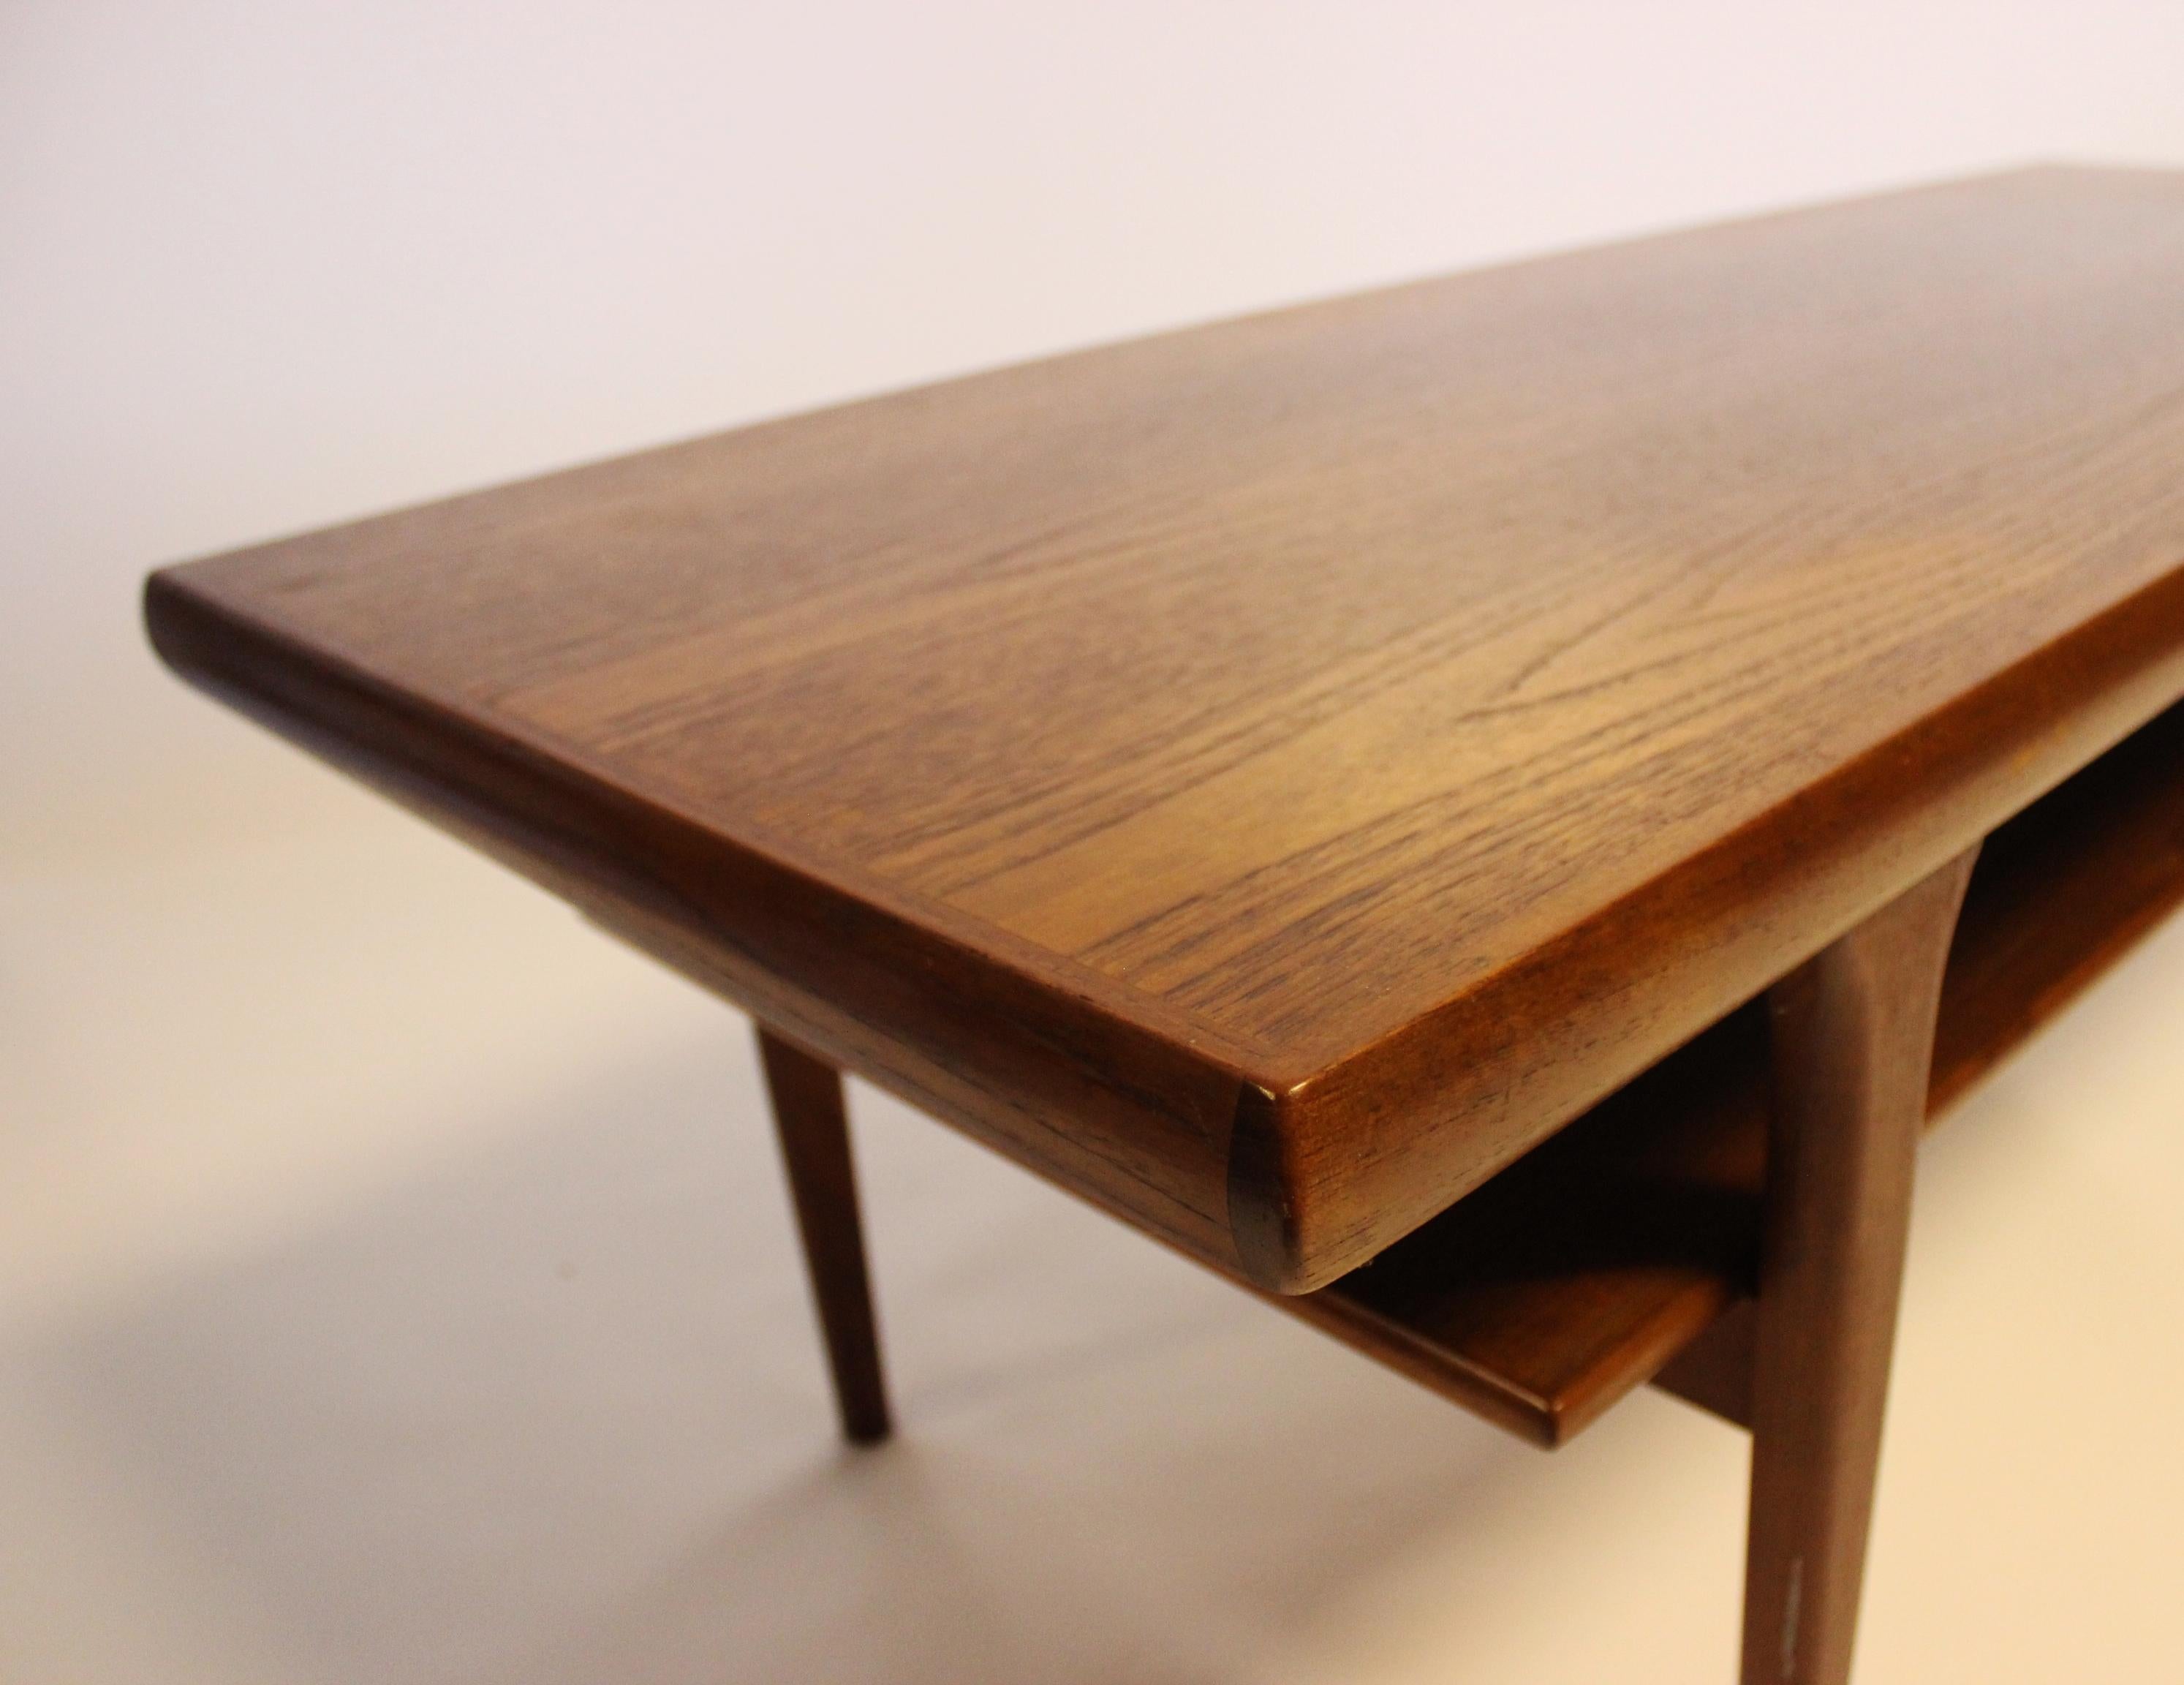 Coffee Table with Shelf in Teak of Danish Design from the 1960s For Sale 1